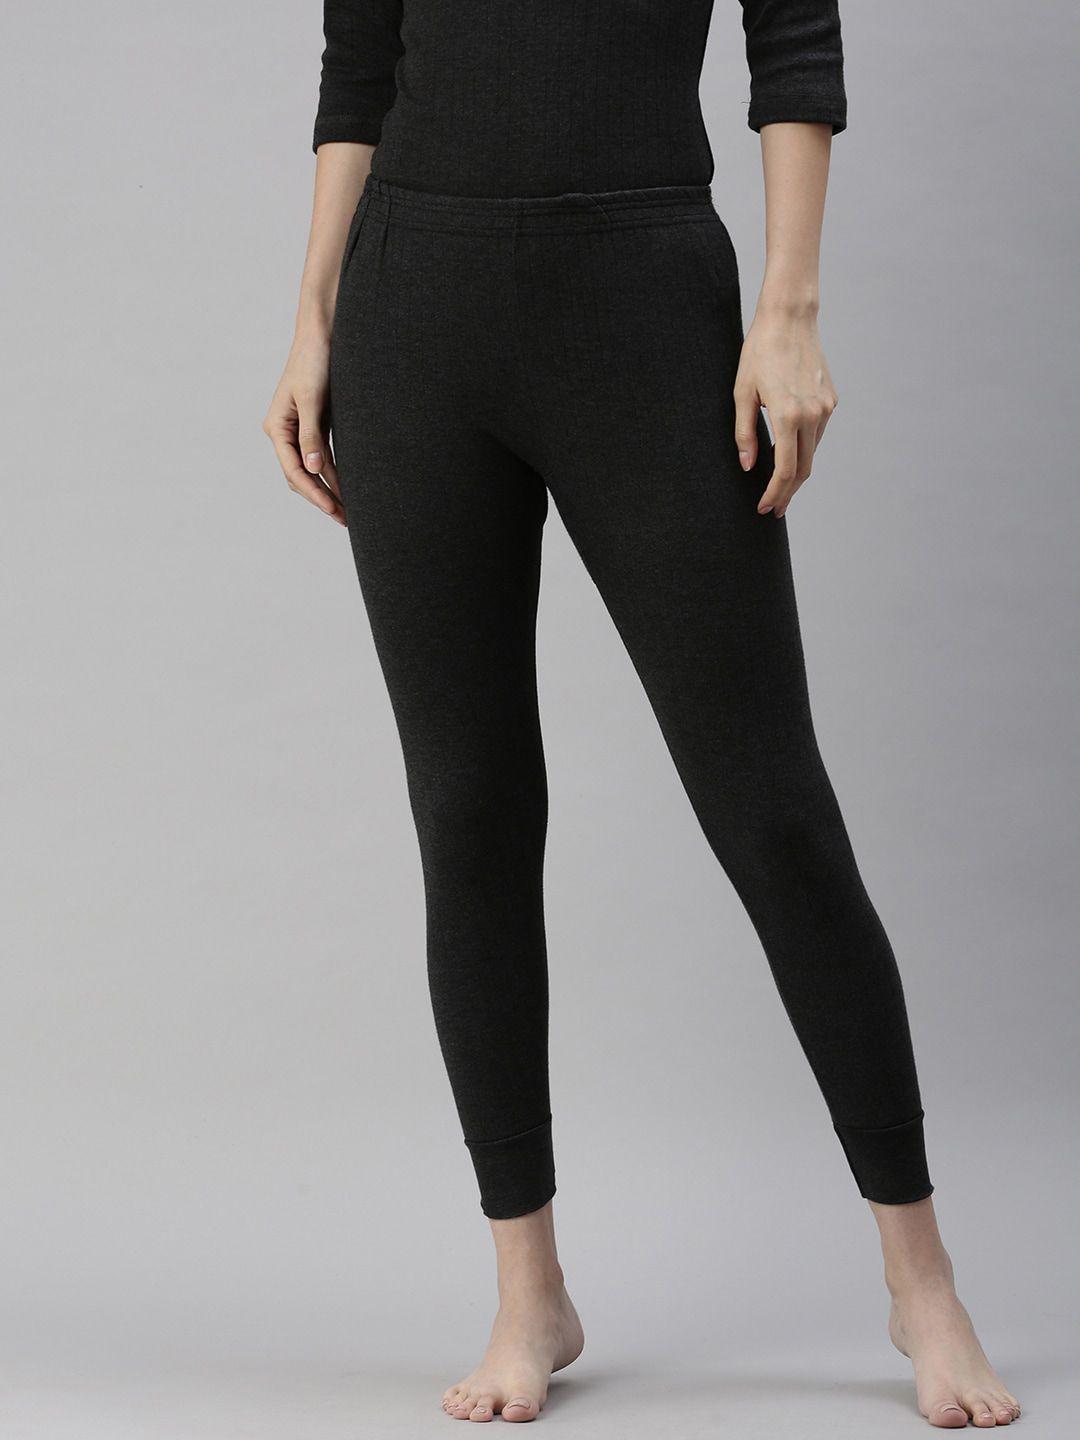 lux-cottswool-women-black-solid-cotton-thermal-bottoms